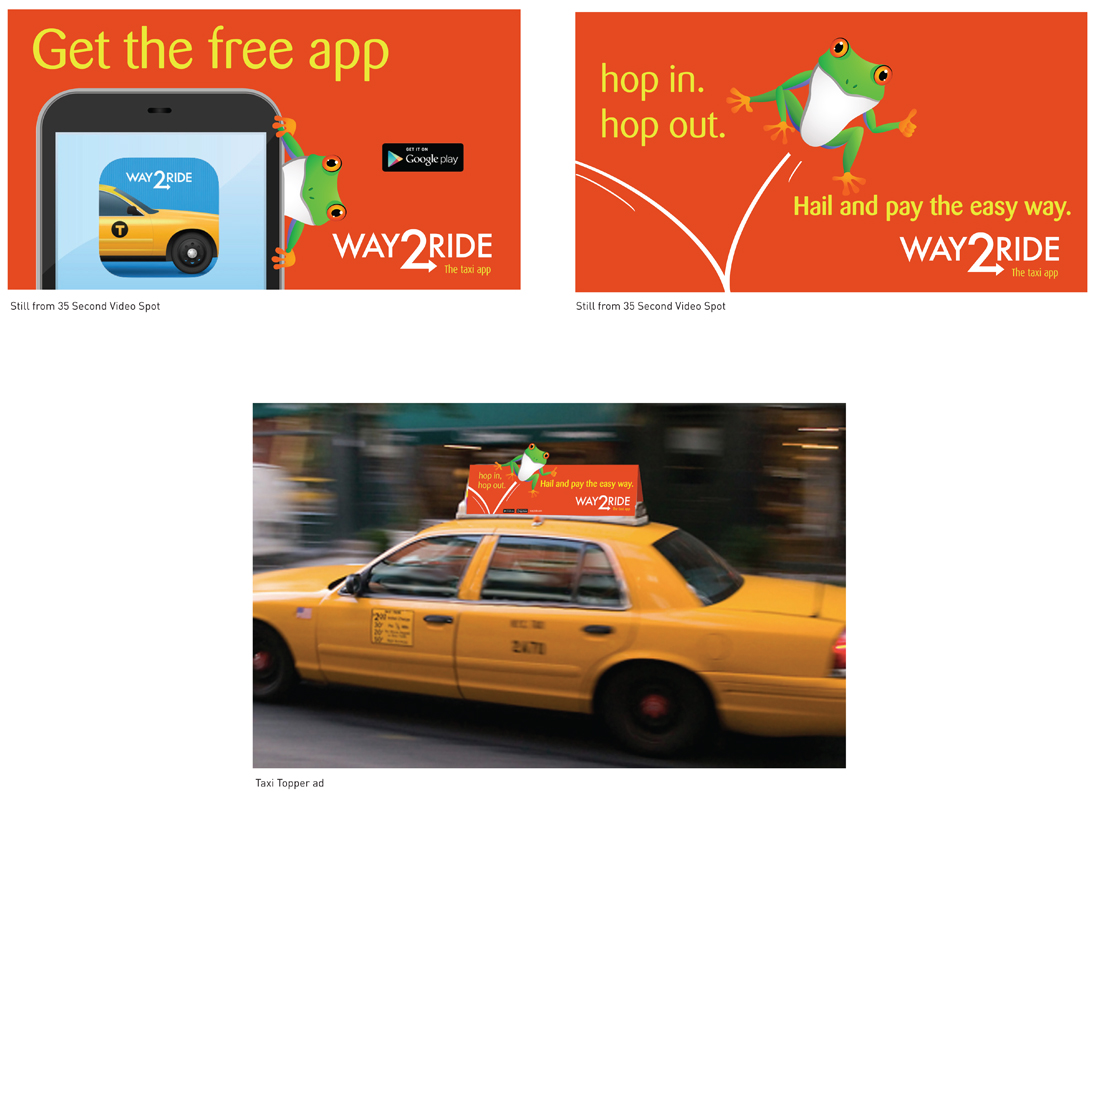 Verifone Way2Ride taxi topper ad and stills from video ad featuring the app and a frog mascot with the phrase "hop in, hop out"